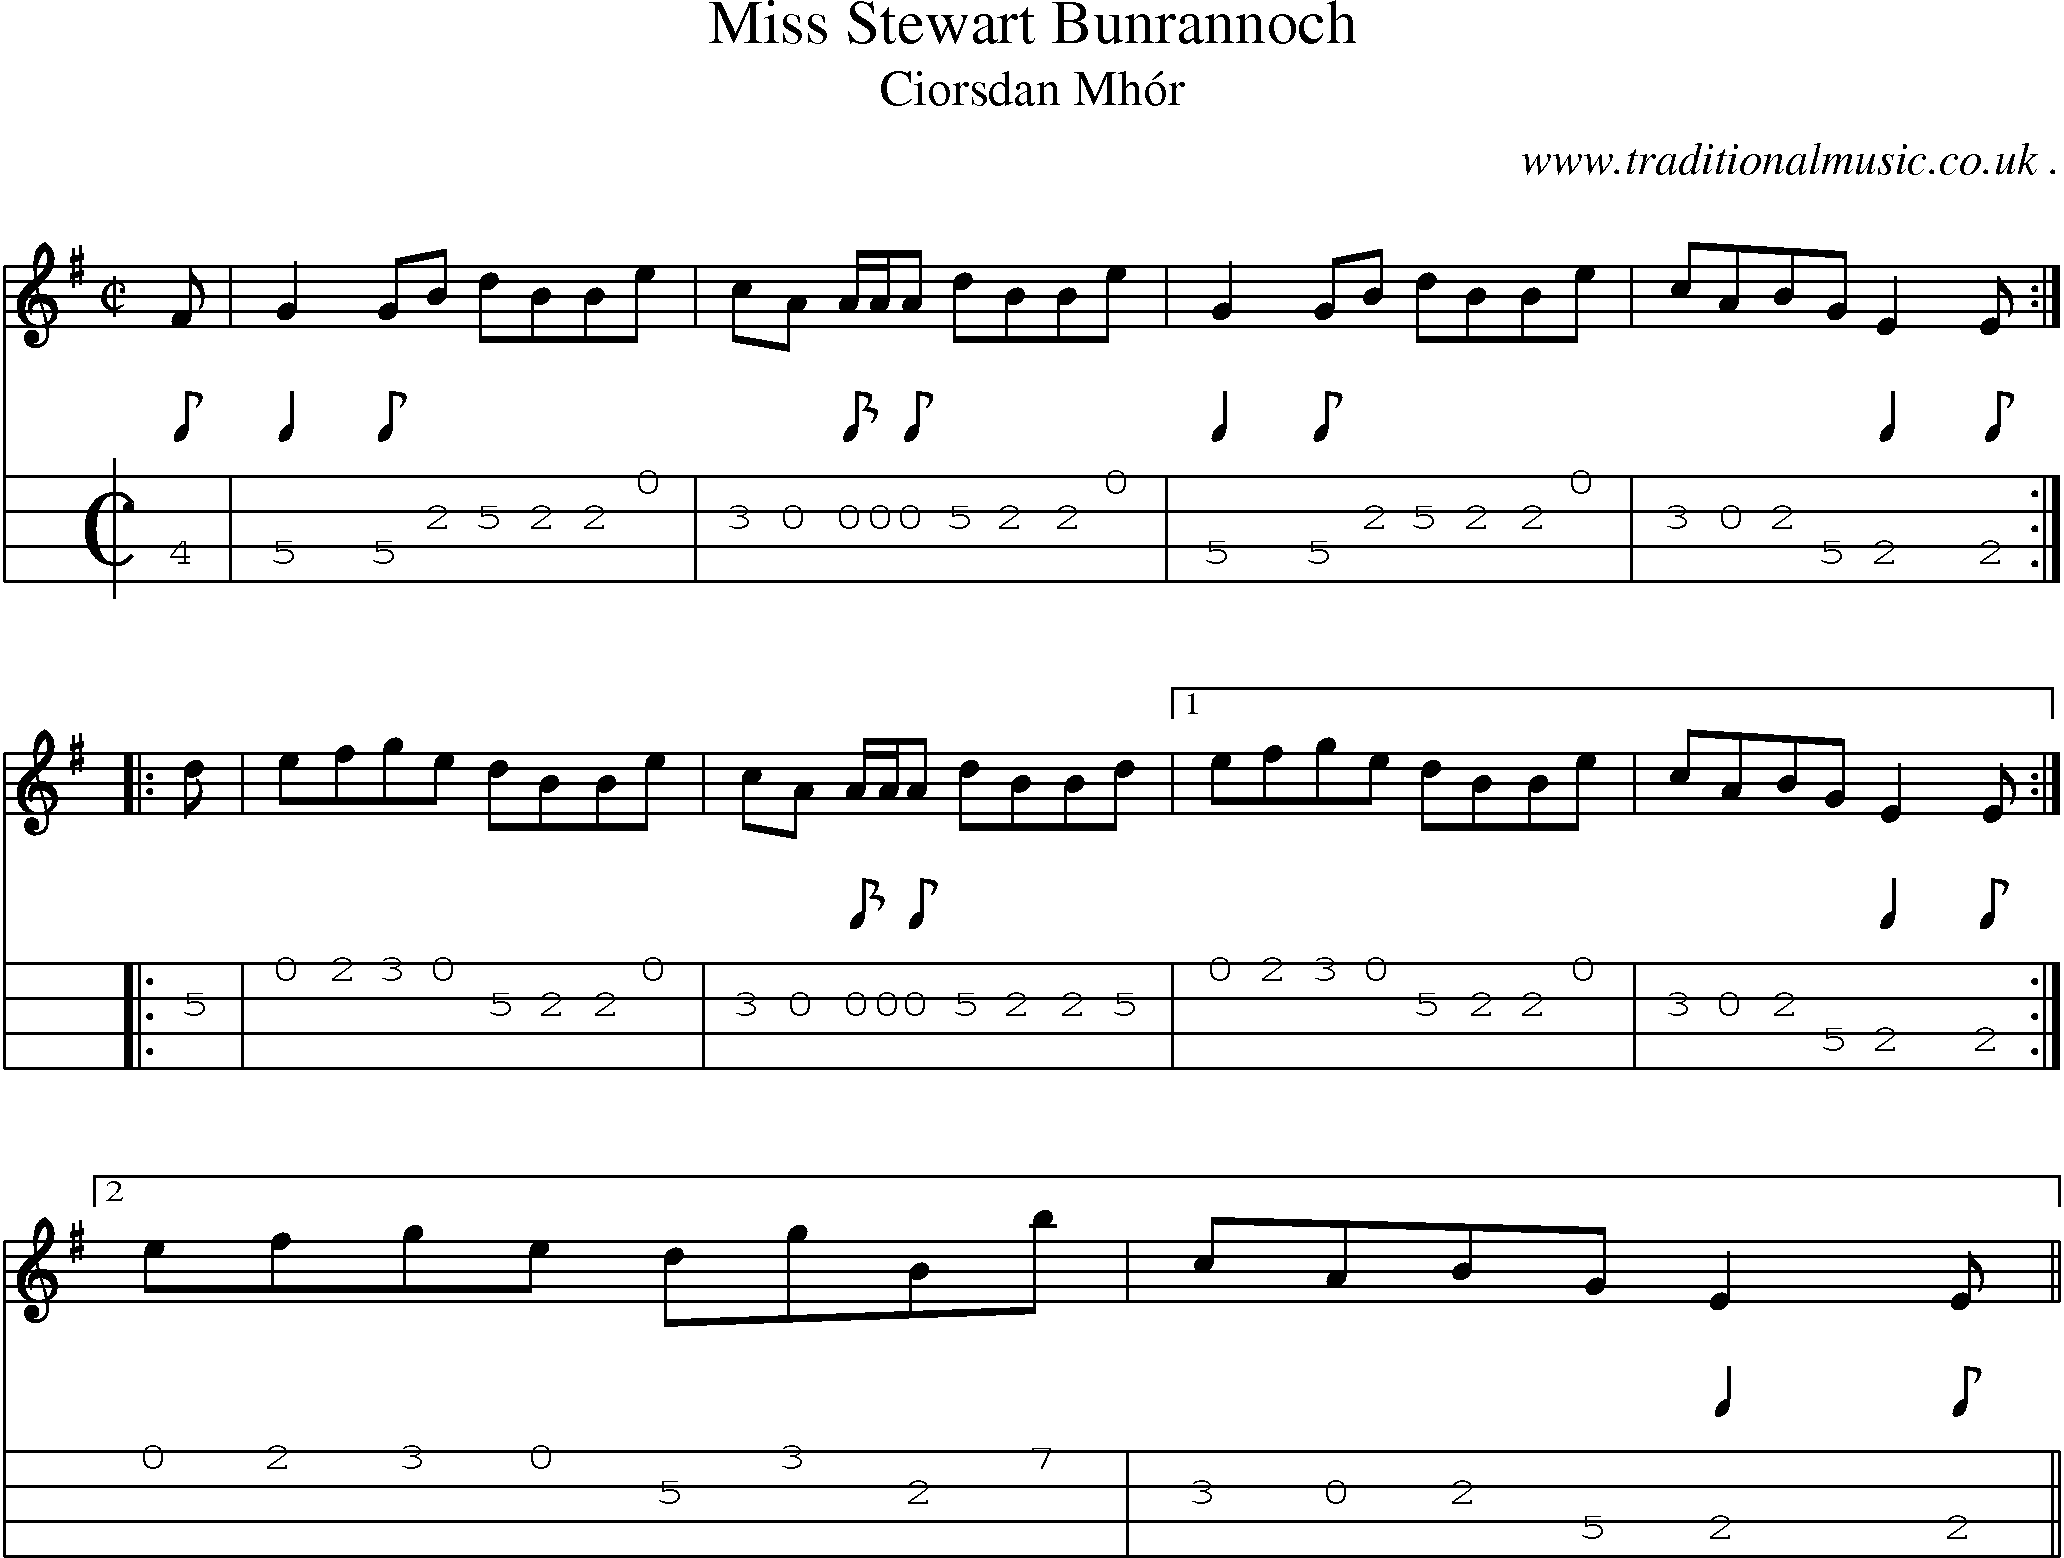 Sheet-music  score, Chords and Mandolin Tabs for Miss Stewart Bunrannoch